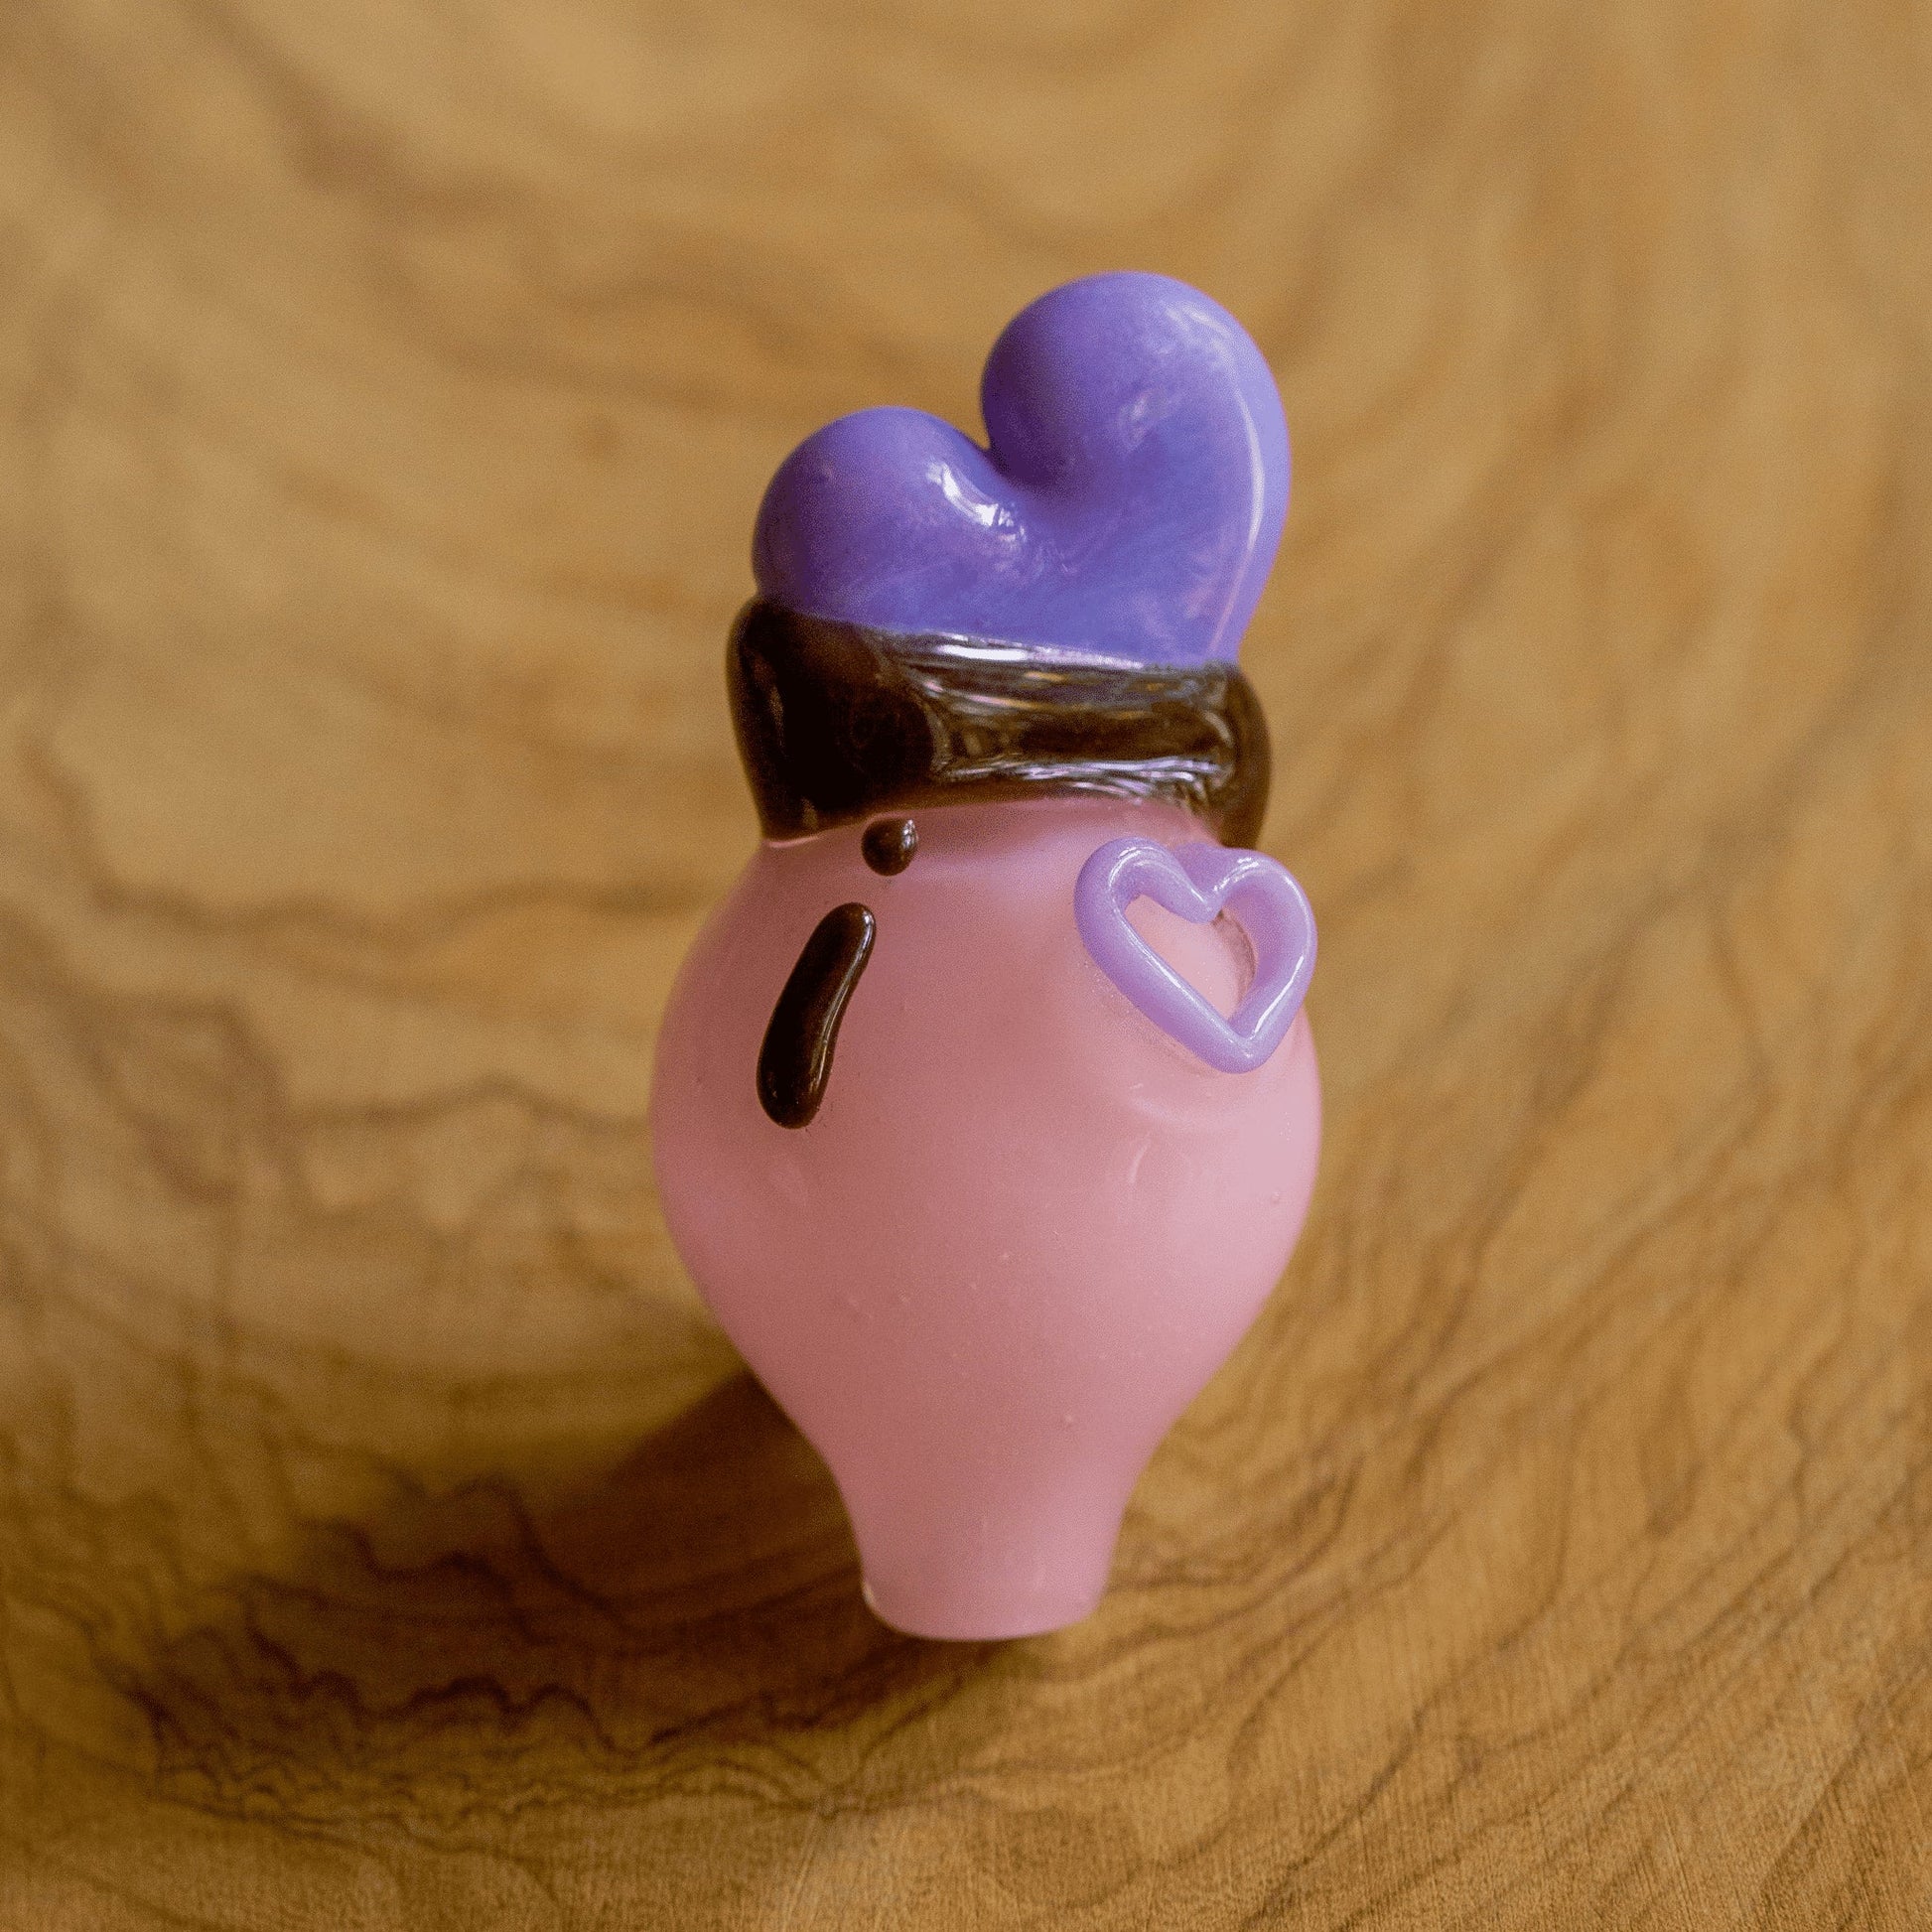 soft design of the Pink Carb Cap w/ Purple Hearts by Sakibomb